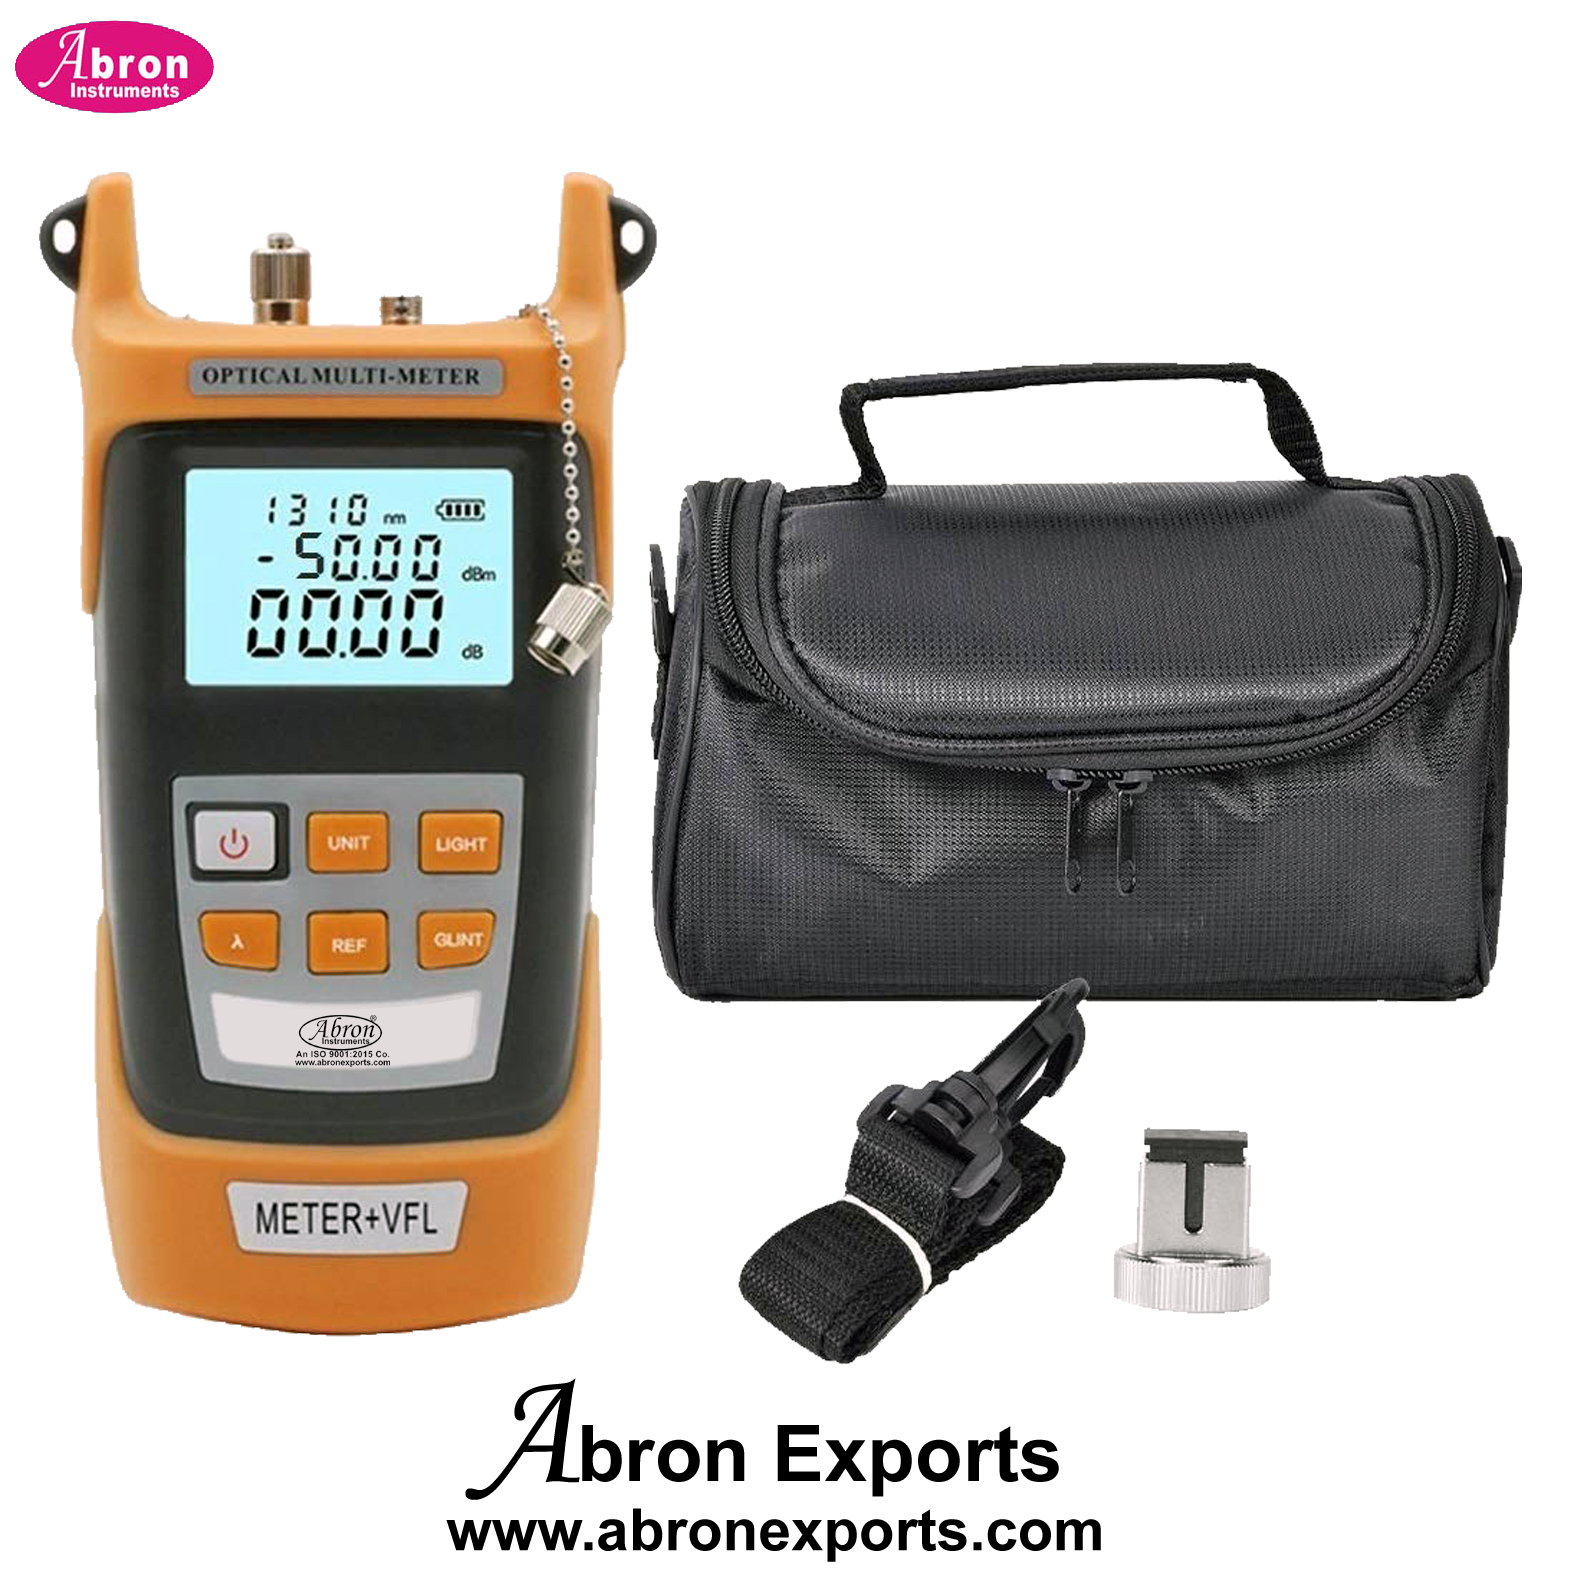 Cable Fault Locator Testing fibre Optics Optical LCD Power Meter with Vfl 10mw -50+20dbm Tester AE-1217F10 